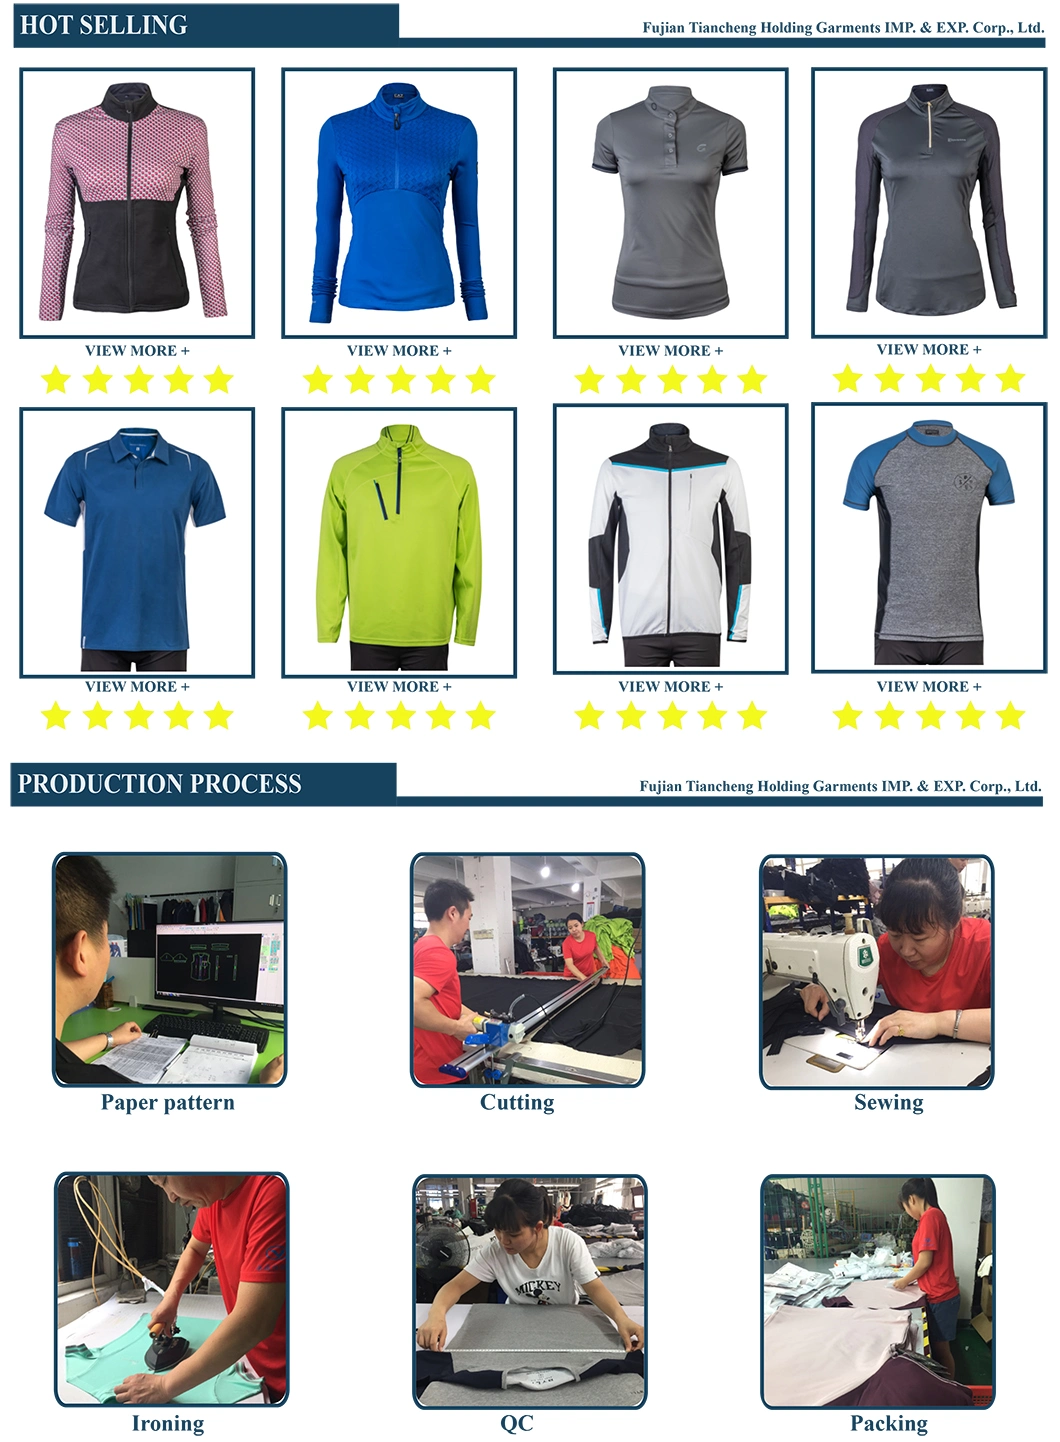 Wholesale Women's New Fitting Yoga Top Sports Clothing Baselayer Polo Shirt